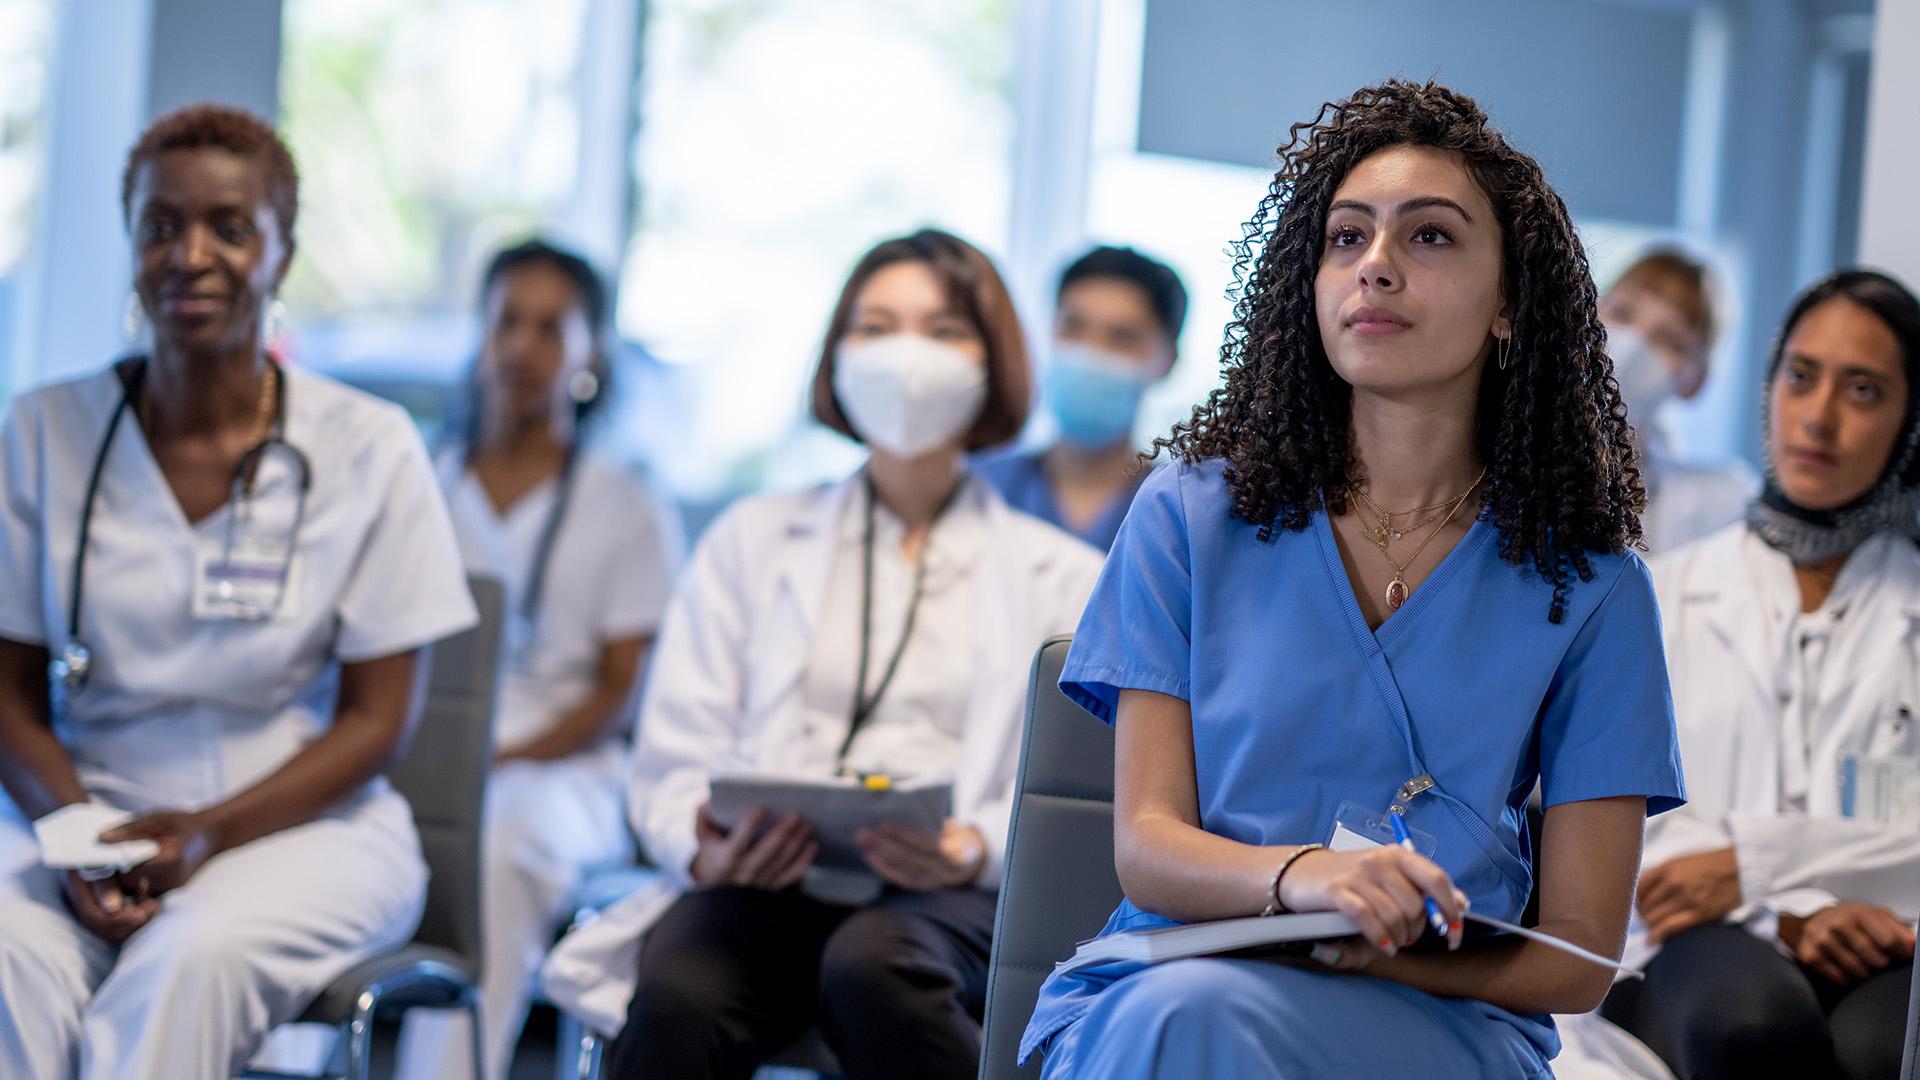 A diverse group of female medical students listen attentively while seated for a lecture.